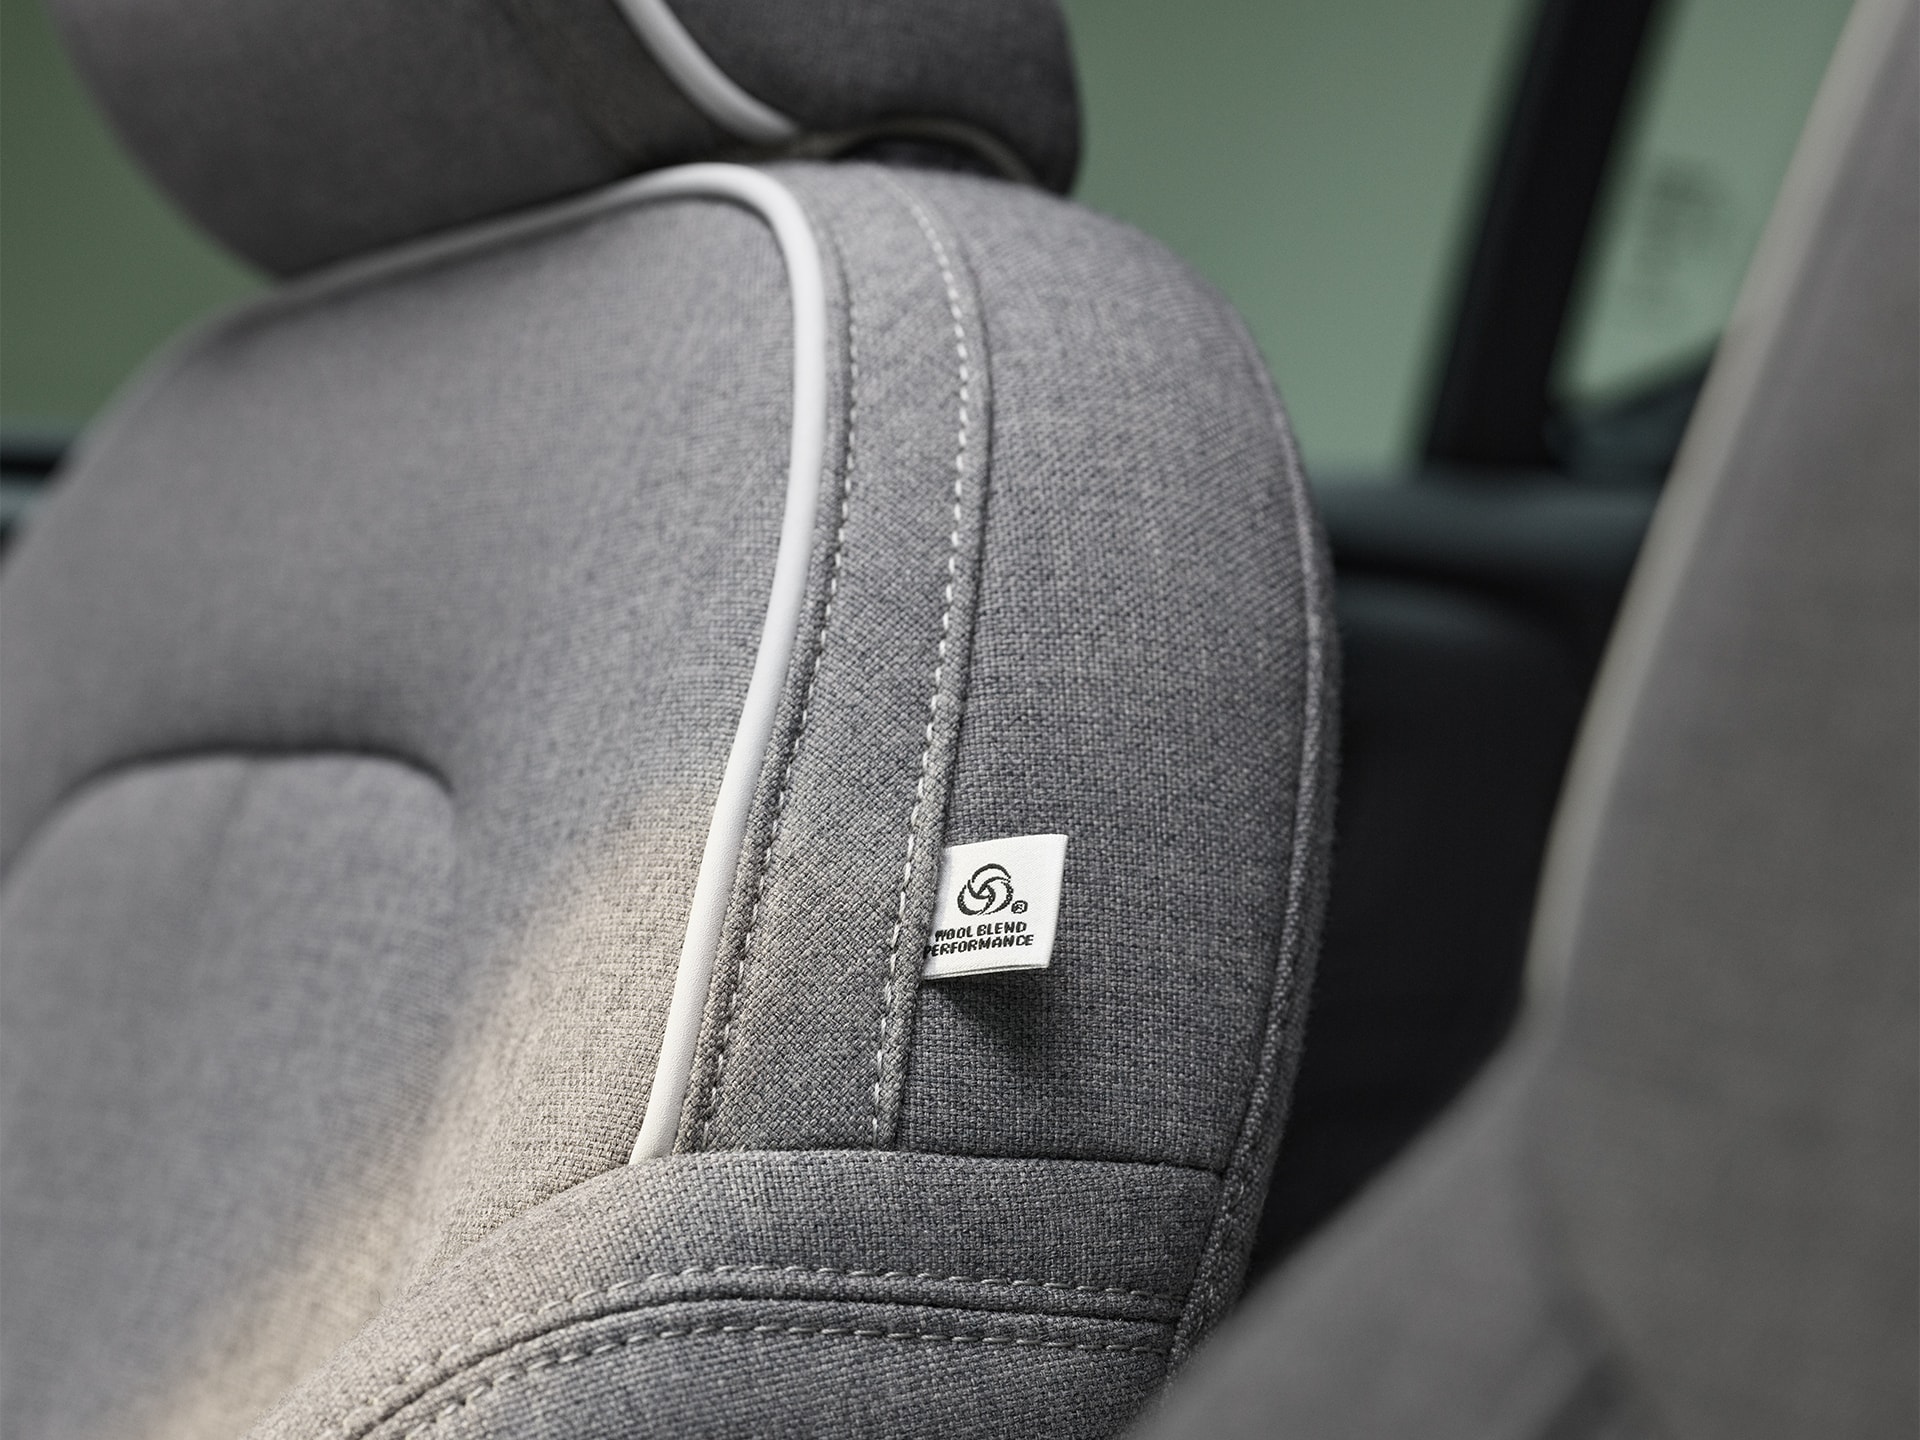 Leather free upholstery in the Volvo XC40 Recharge. 